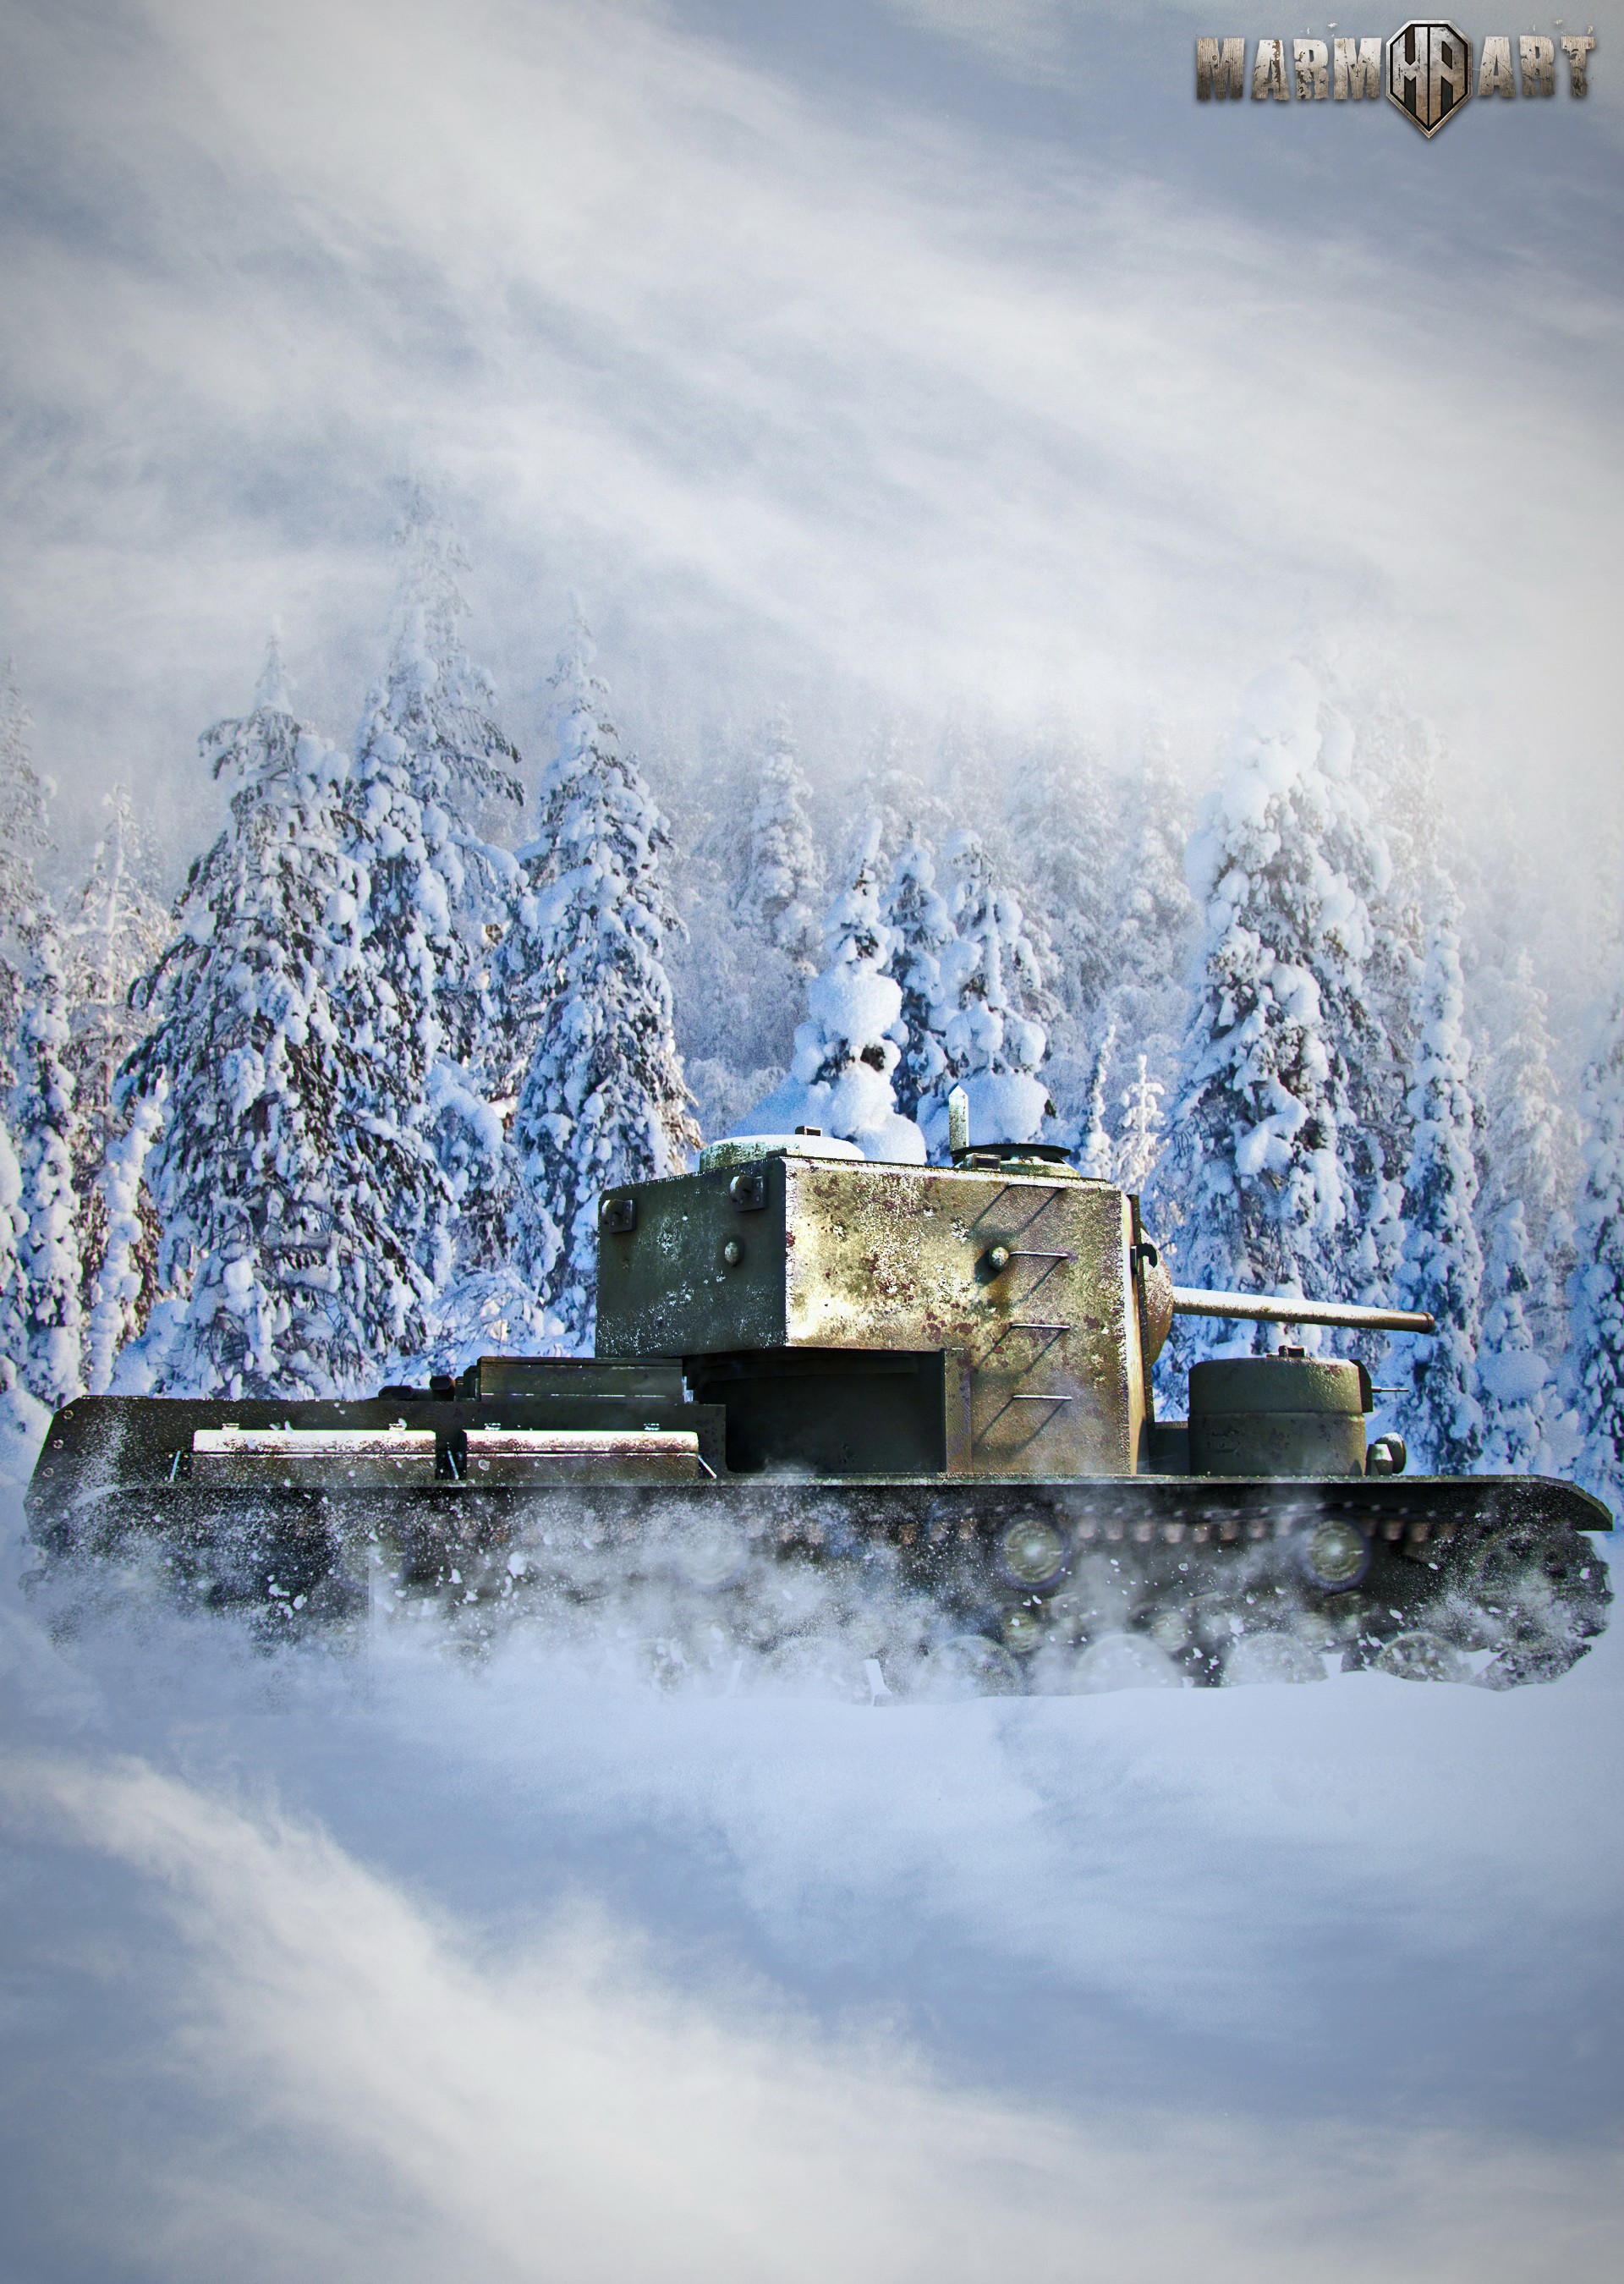 General 1920x2700 World of Tanks tank wargaming video games KV-5 Russian/Soviet tanks portrait display trees snow covered snow military vehicle military nature side view winter video game art